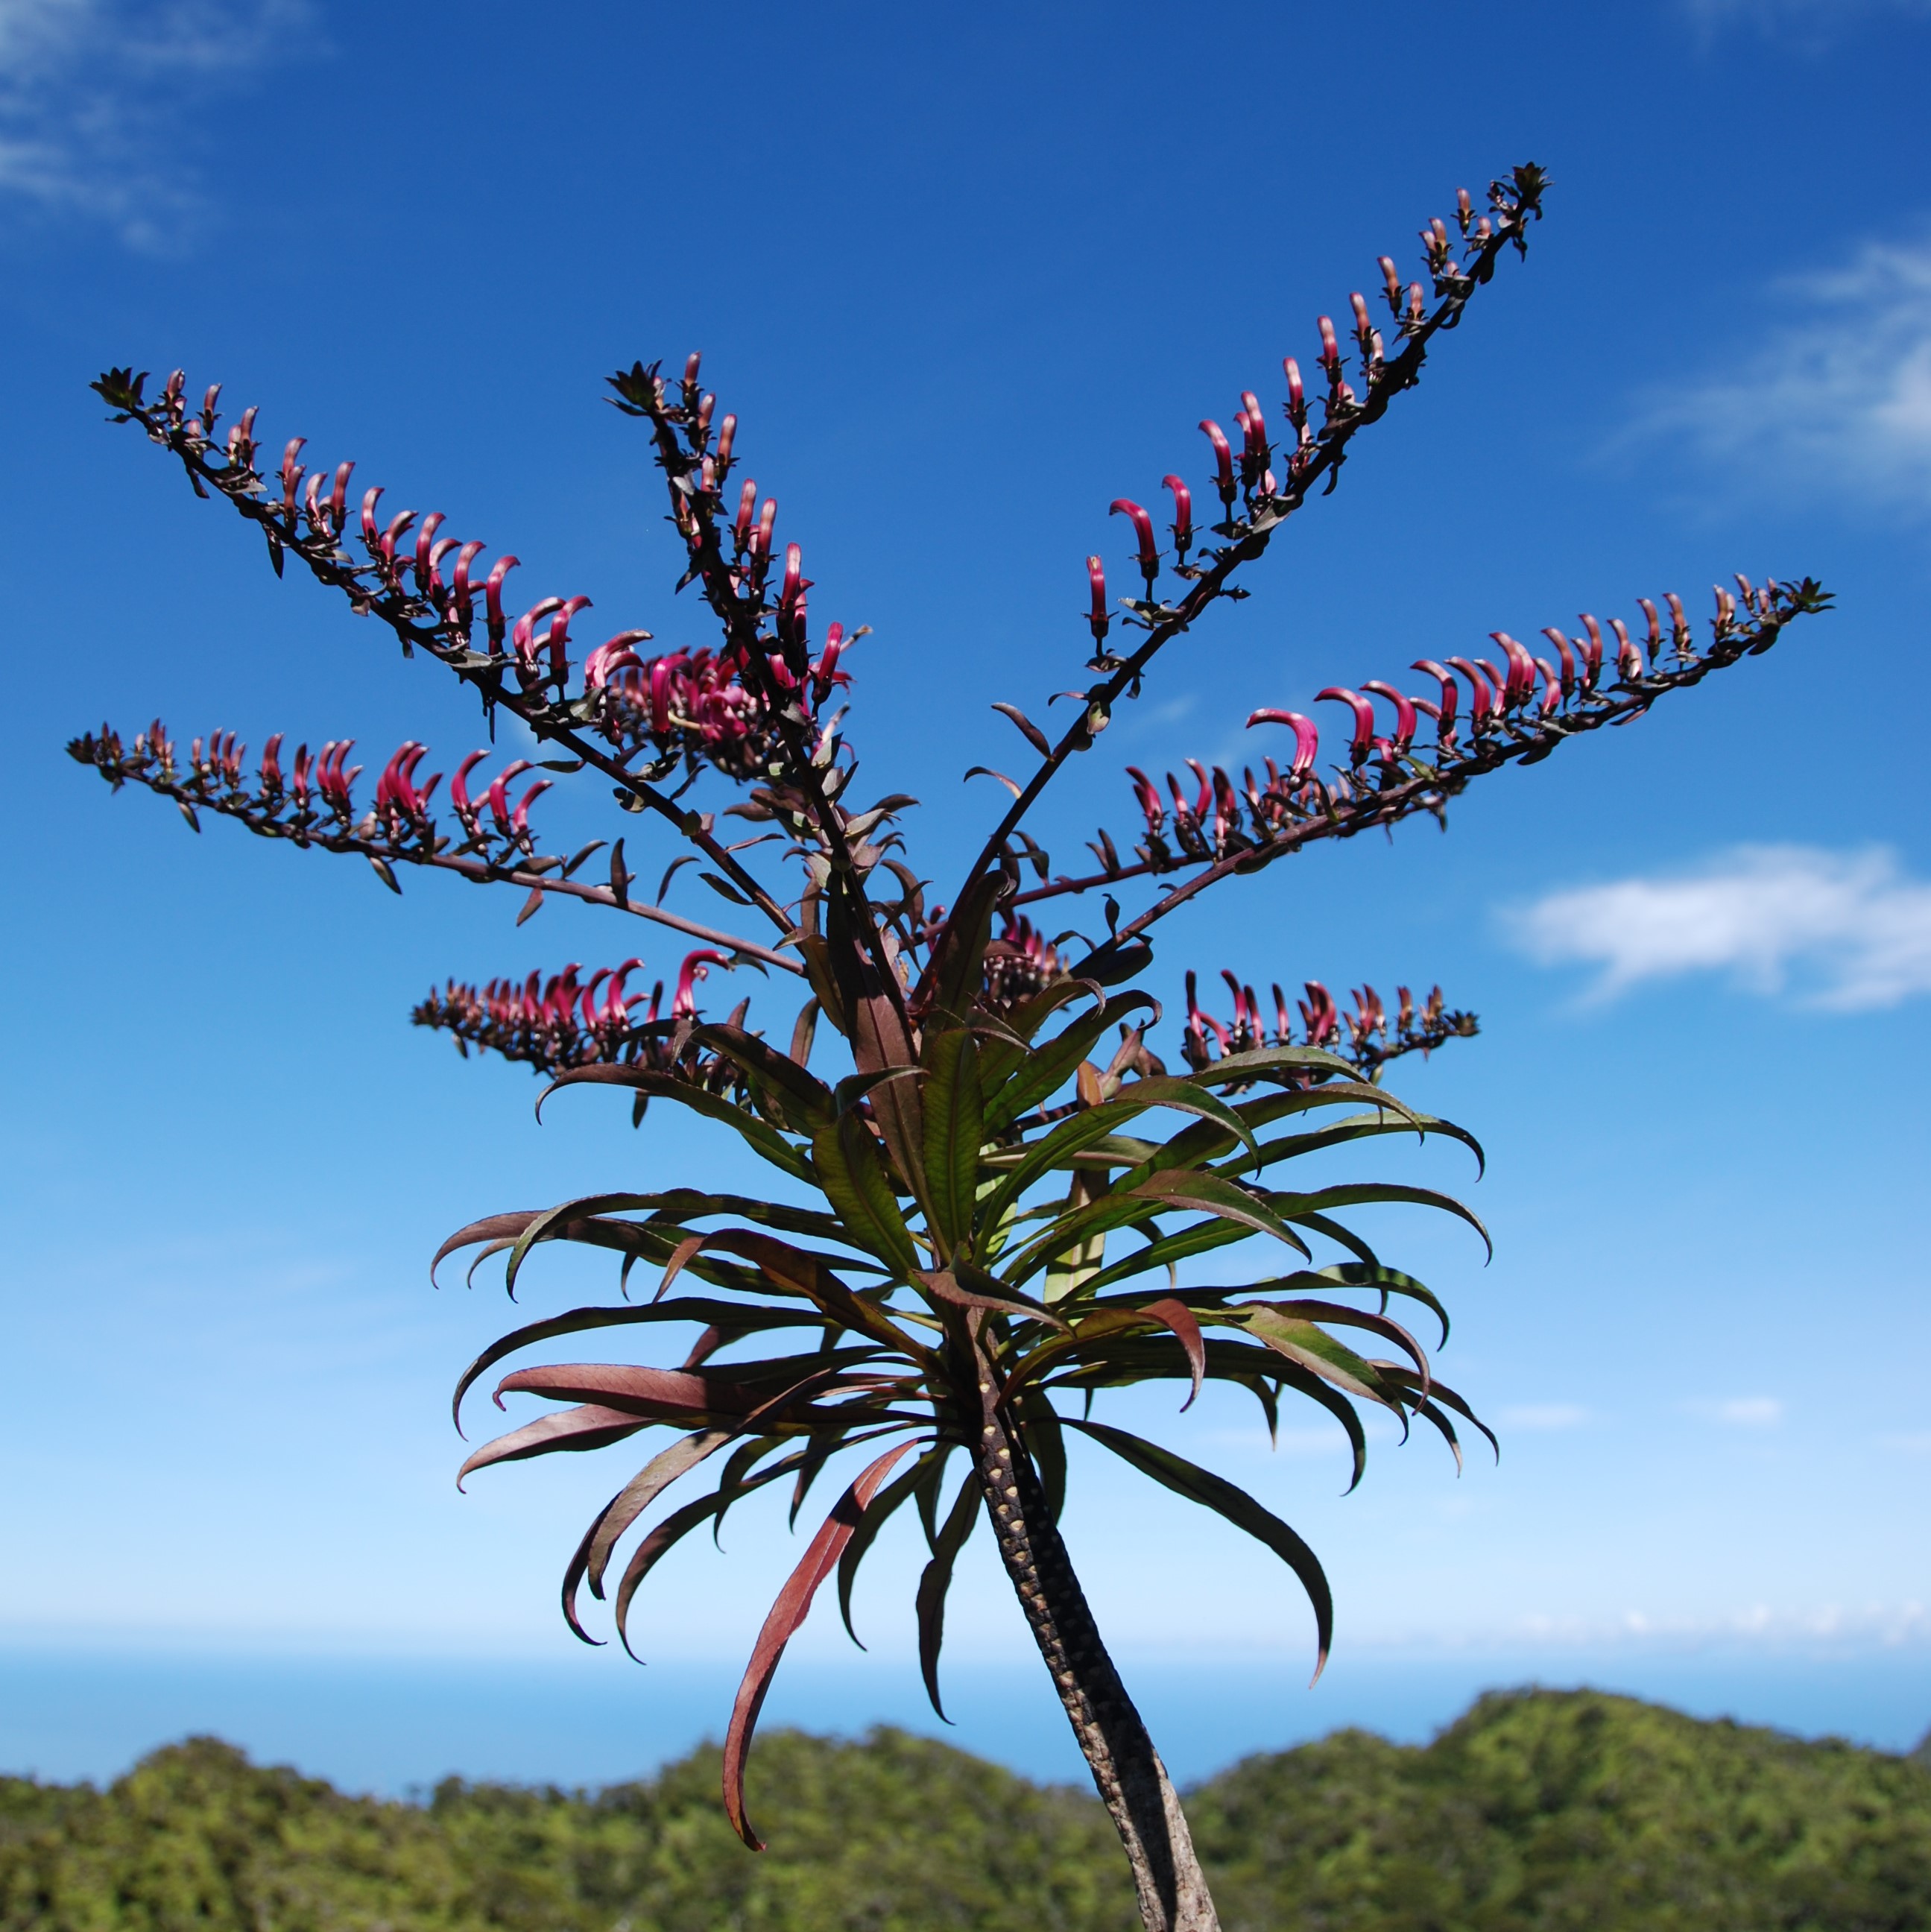 A tall woody stem with leaf scars, ending in several whorls of simple lanceolate leaves with nine visible infloresence spikes emerging from the top. On each infloresence spike is a row many curved pink flowers all facing towards the sky.